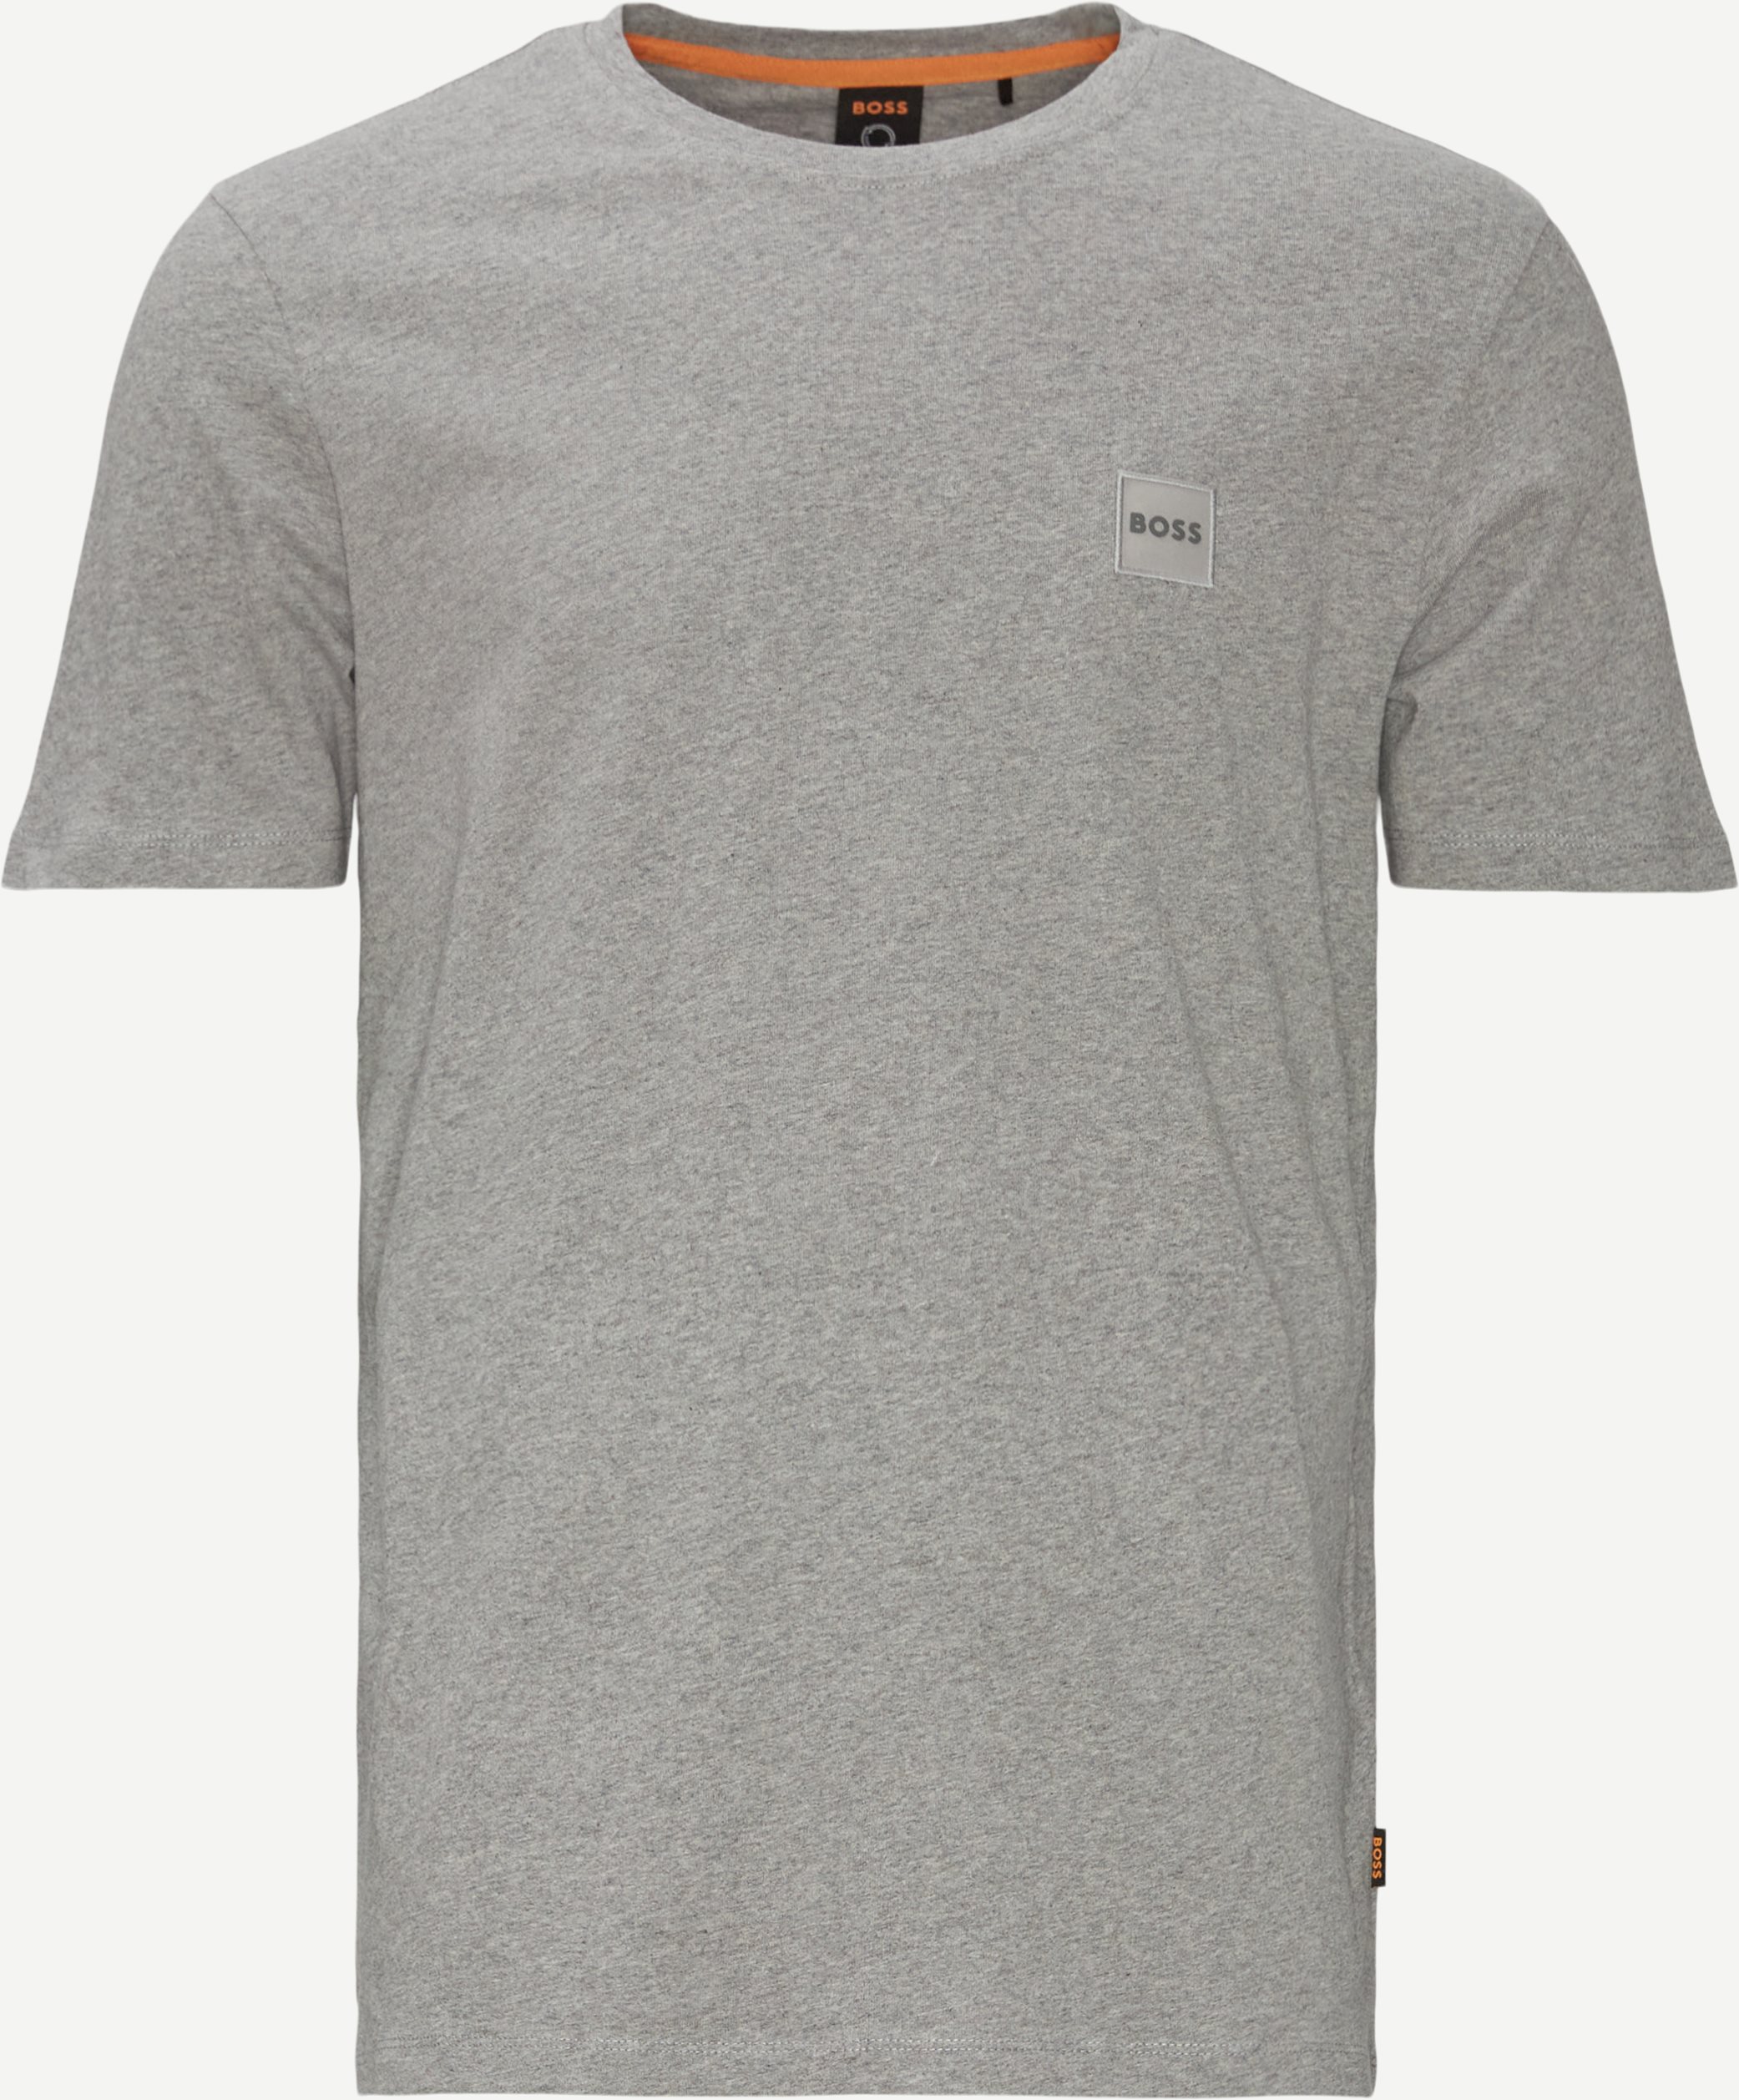 T-shirts - Relaxed fit - Grey